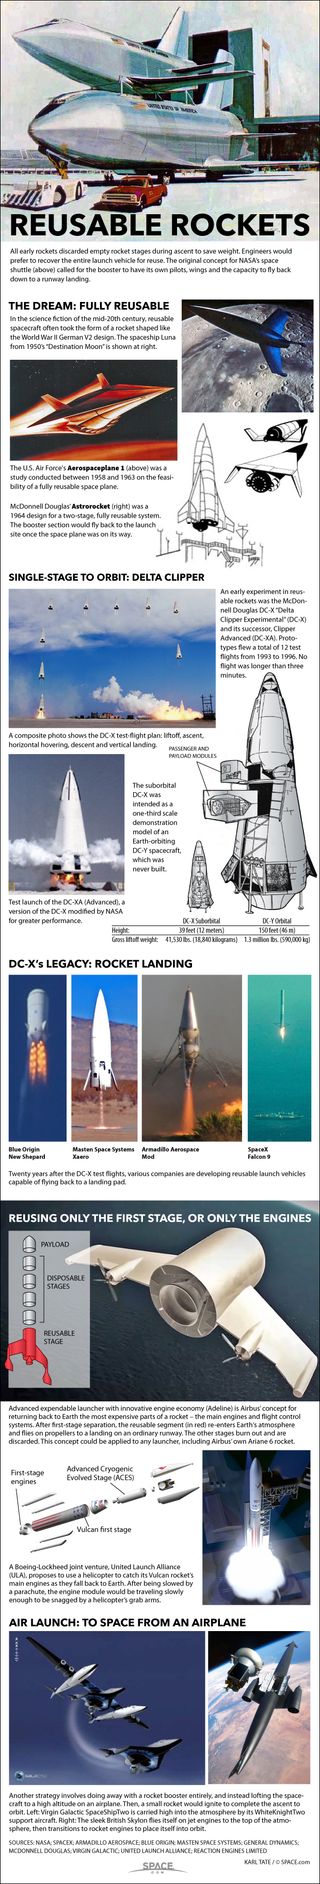 Since the dawn of the space age, engineers have wanted to return expensive launch vehicles to Earth for reuse, rather than let them burn up and be destroyed in the atmosphere. See our history of reusable rocket technology in this full infographic.